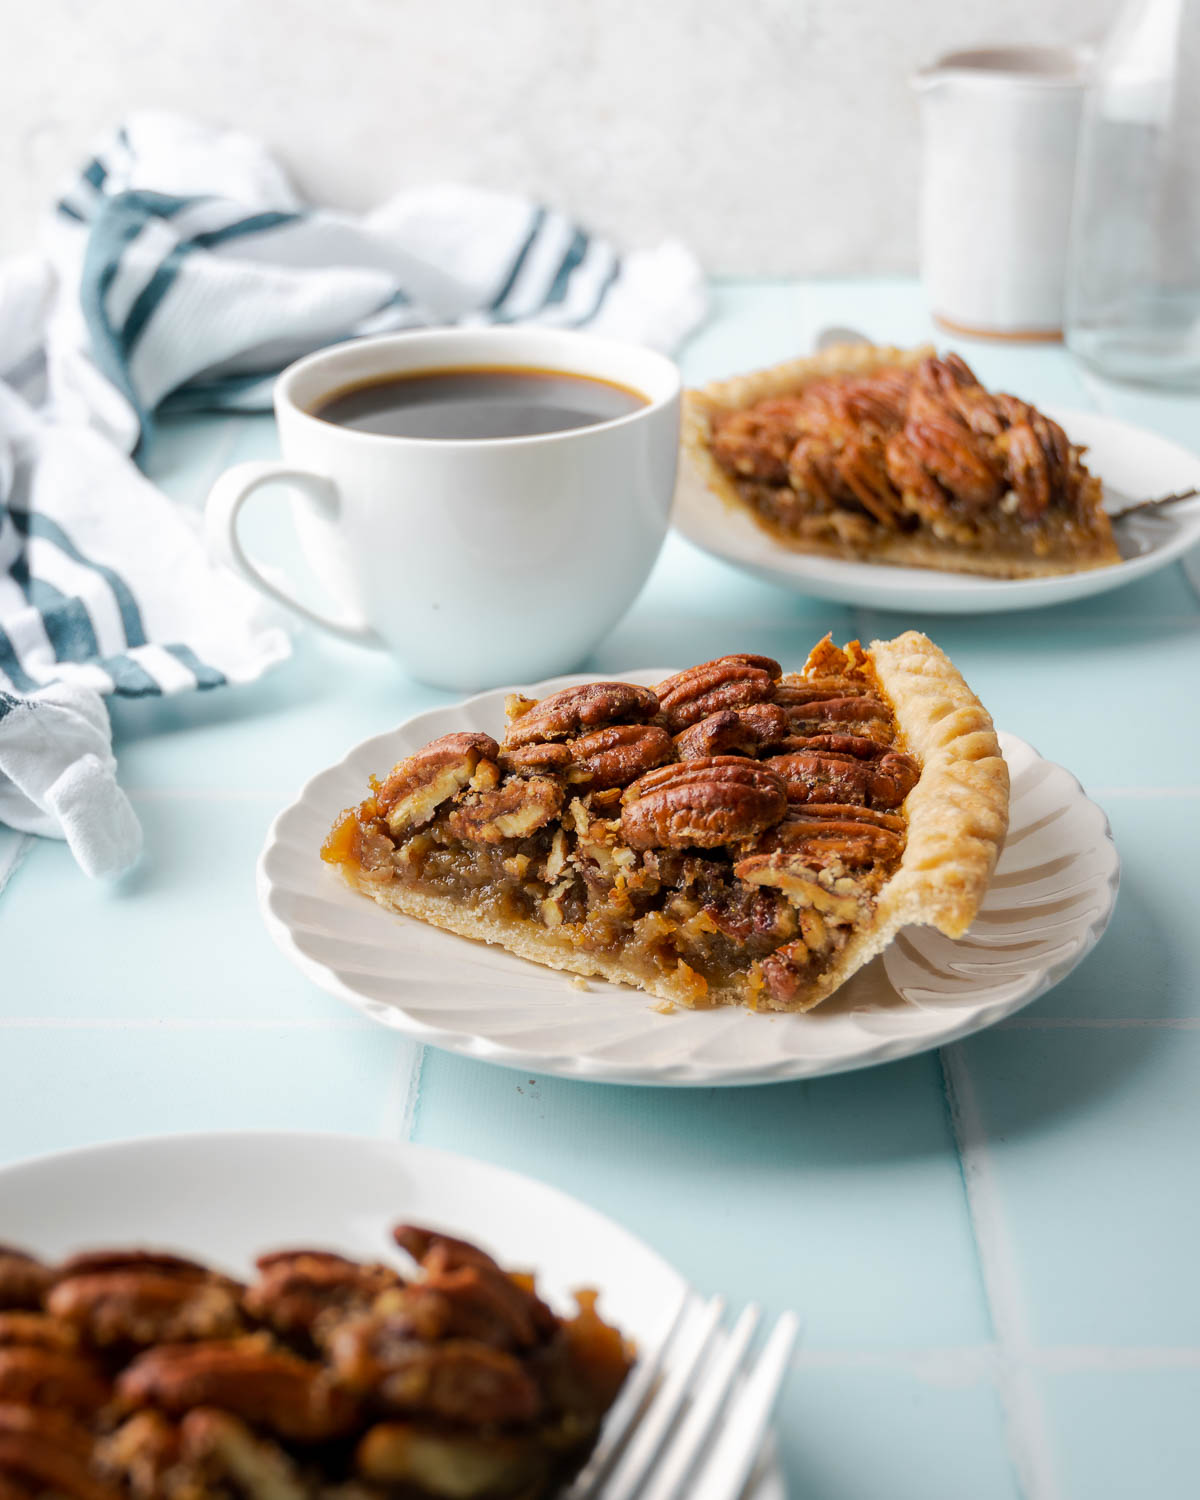 A slice of pecan pie on a white plate served with a cup of coffee.